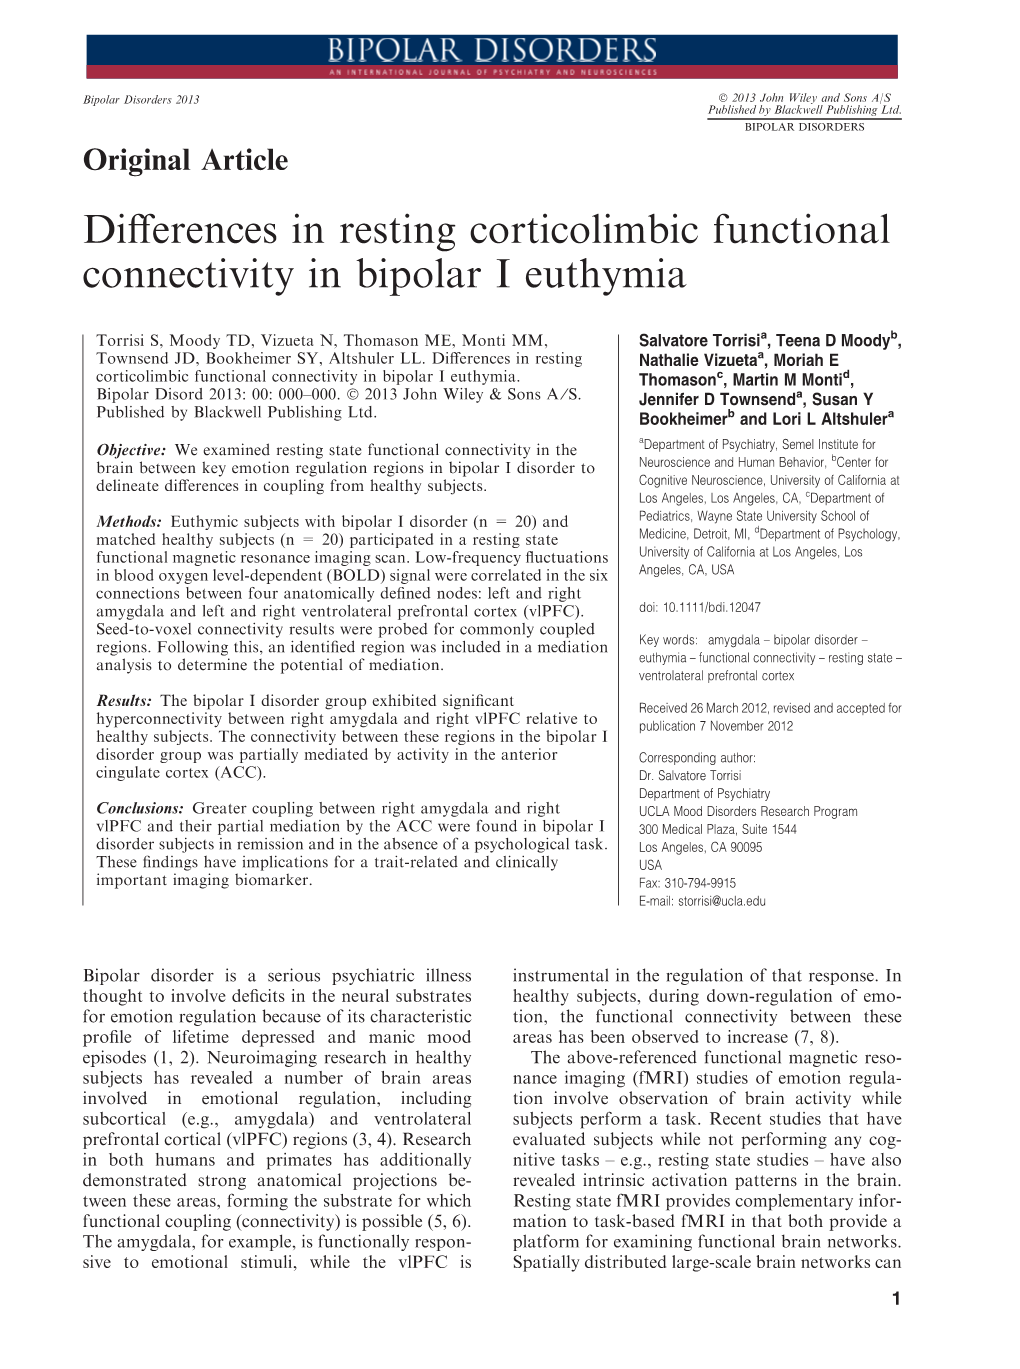 Differences in Resting Corticolimbic Functional Connectivity in Bipolar I